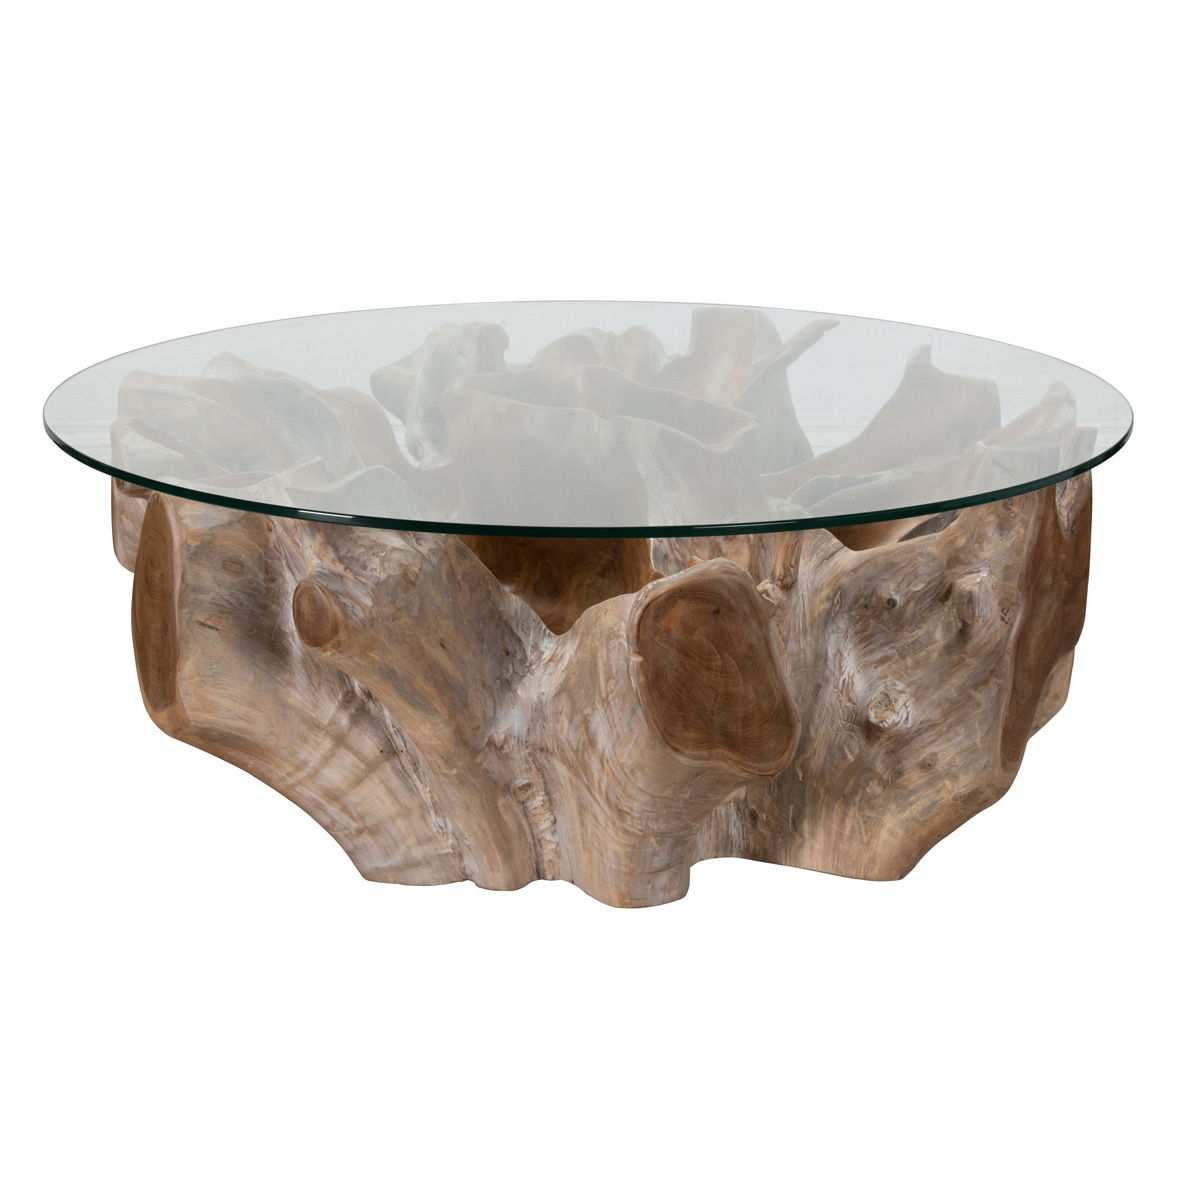 Hailey - Coffee Table - Natural White Wash